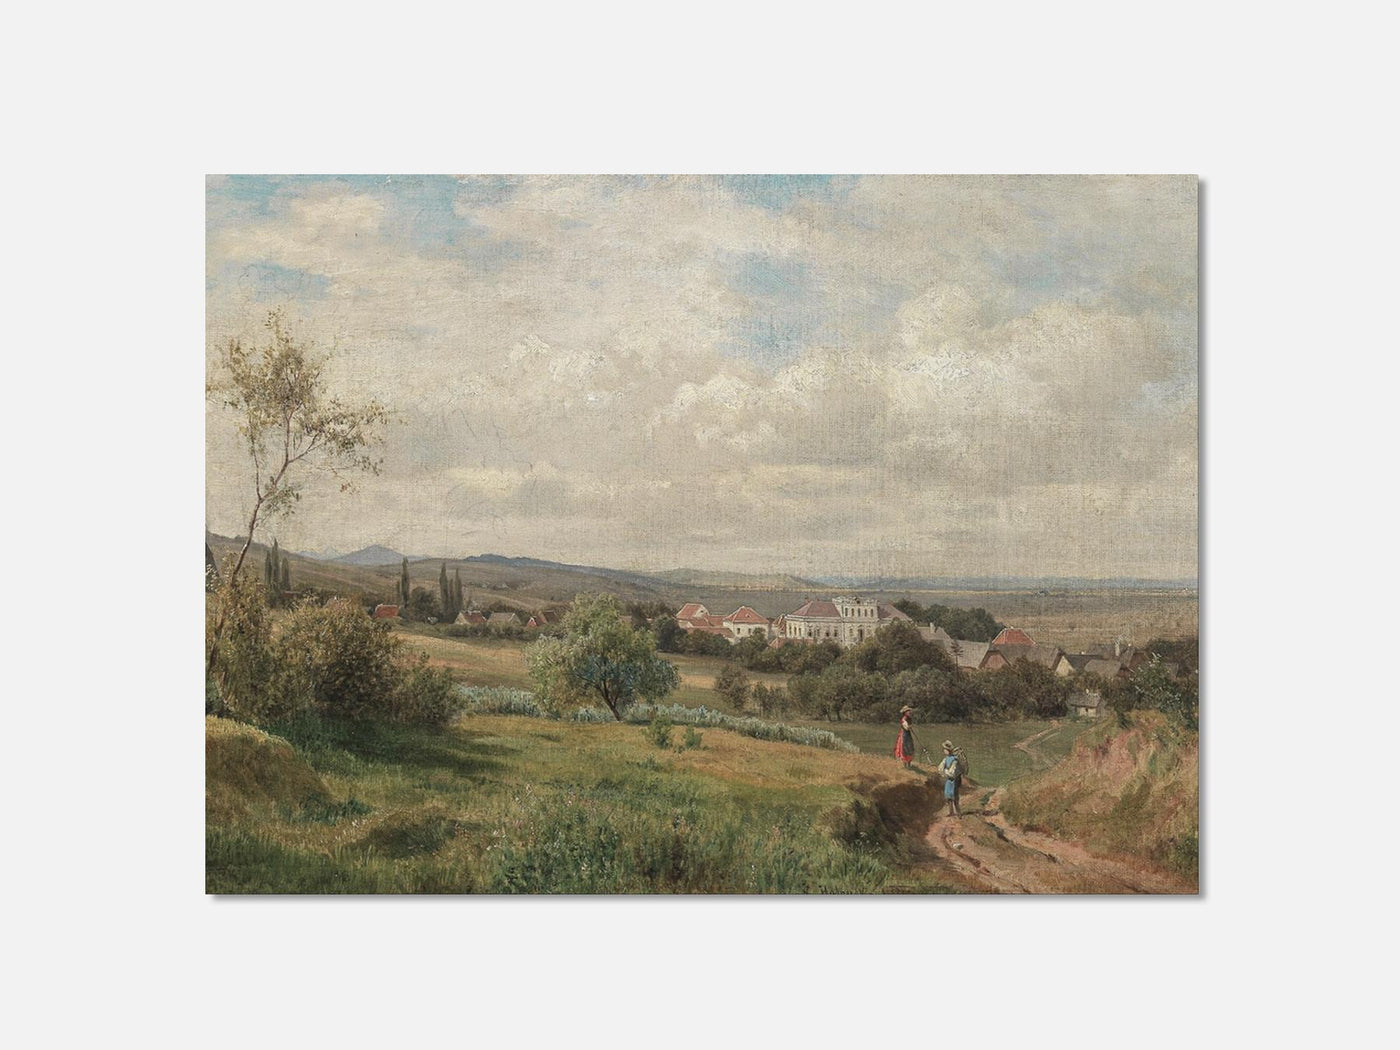 A Scene in Tulbing with Tulbing Castle (formerly Mönchshof Seitenstetten Abbey) (1873)  Art Print mockup - A_p449-V1-PC_AP-SS_1-PS_5x7-C_def